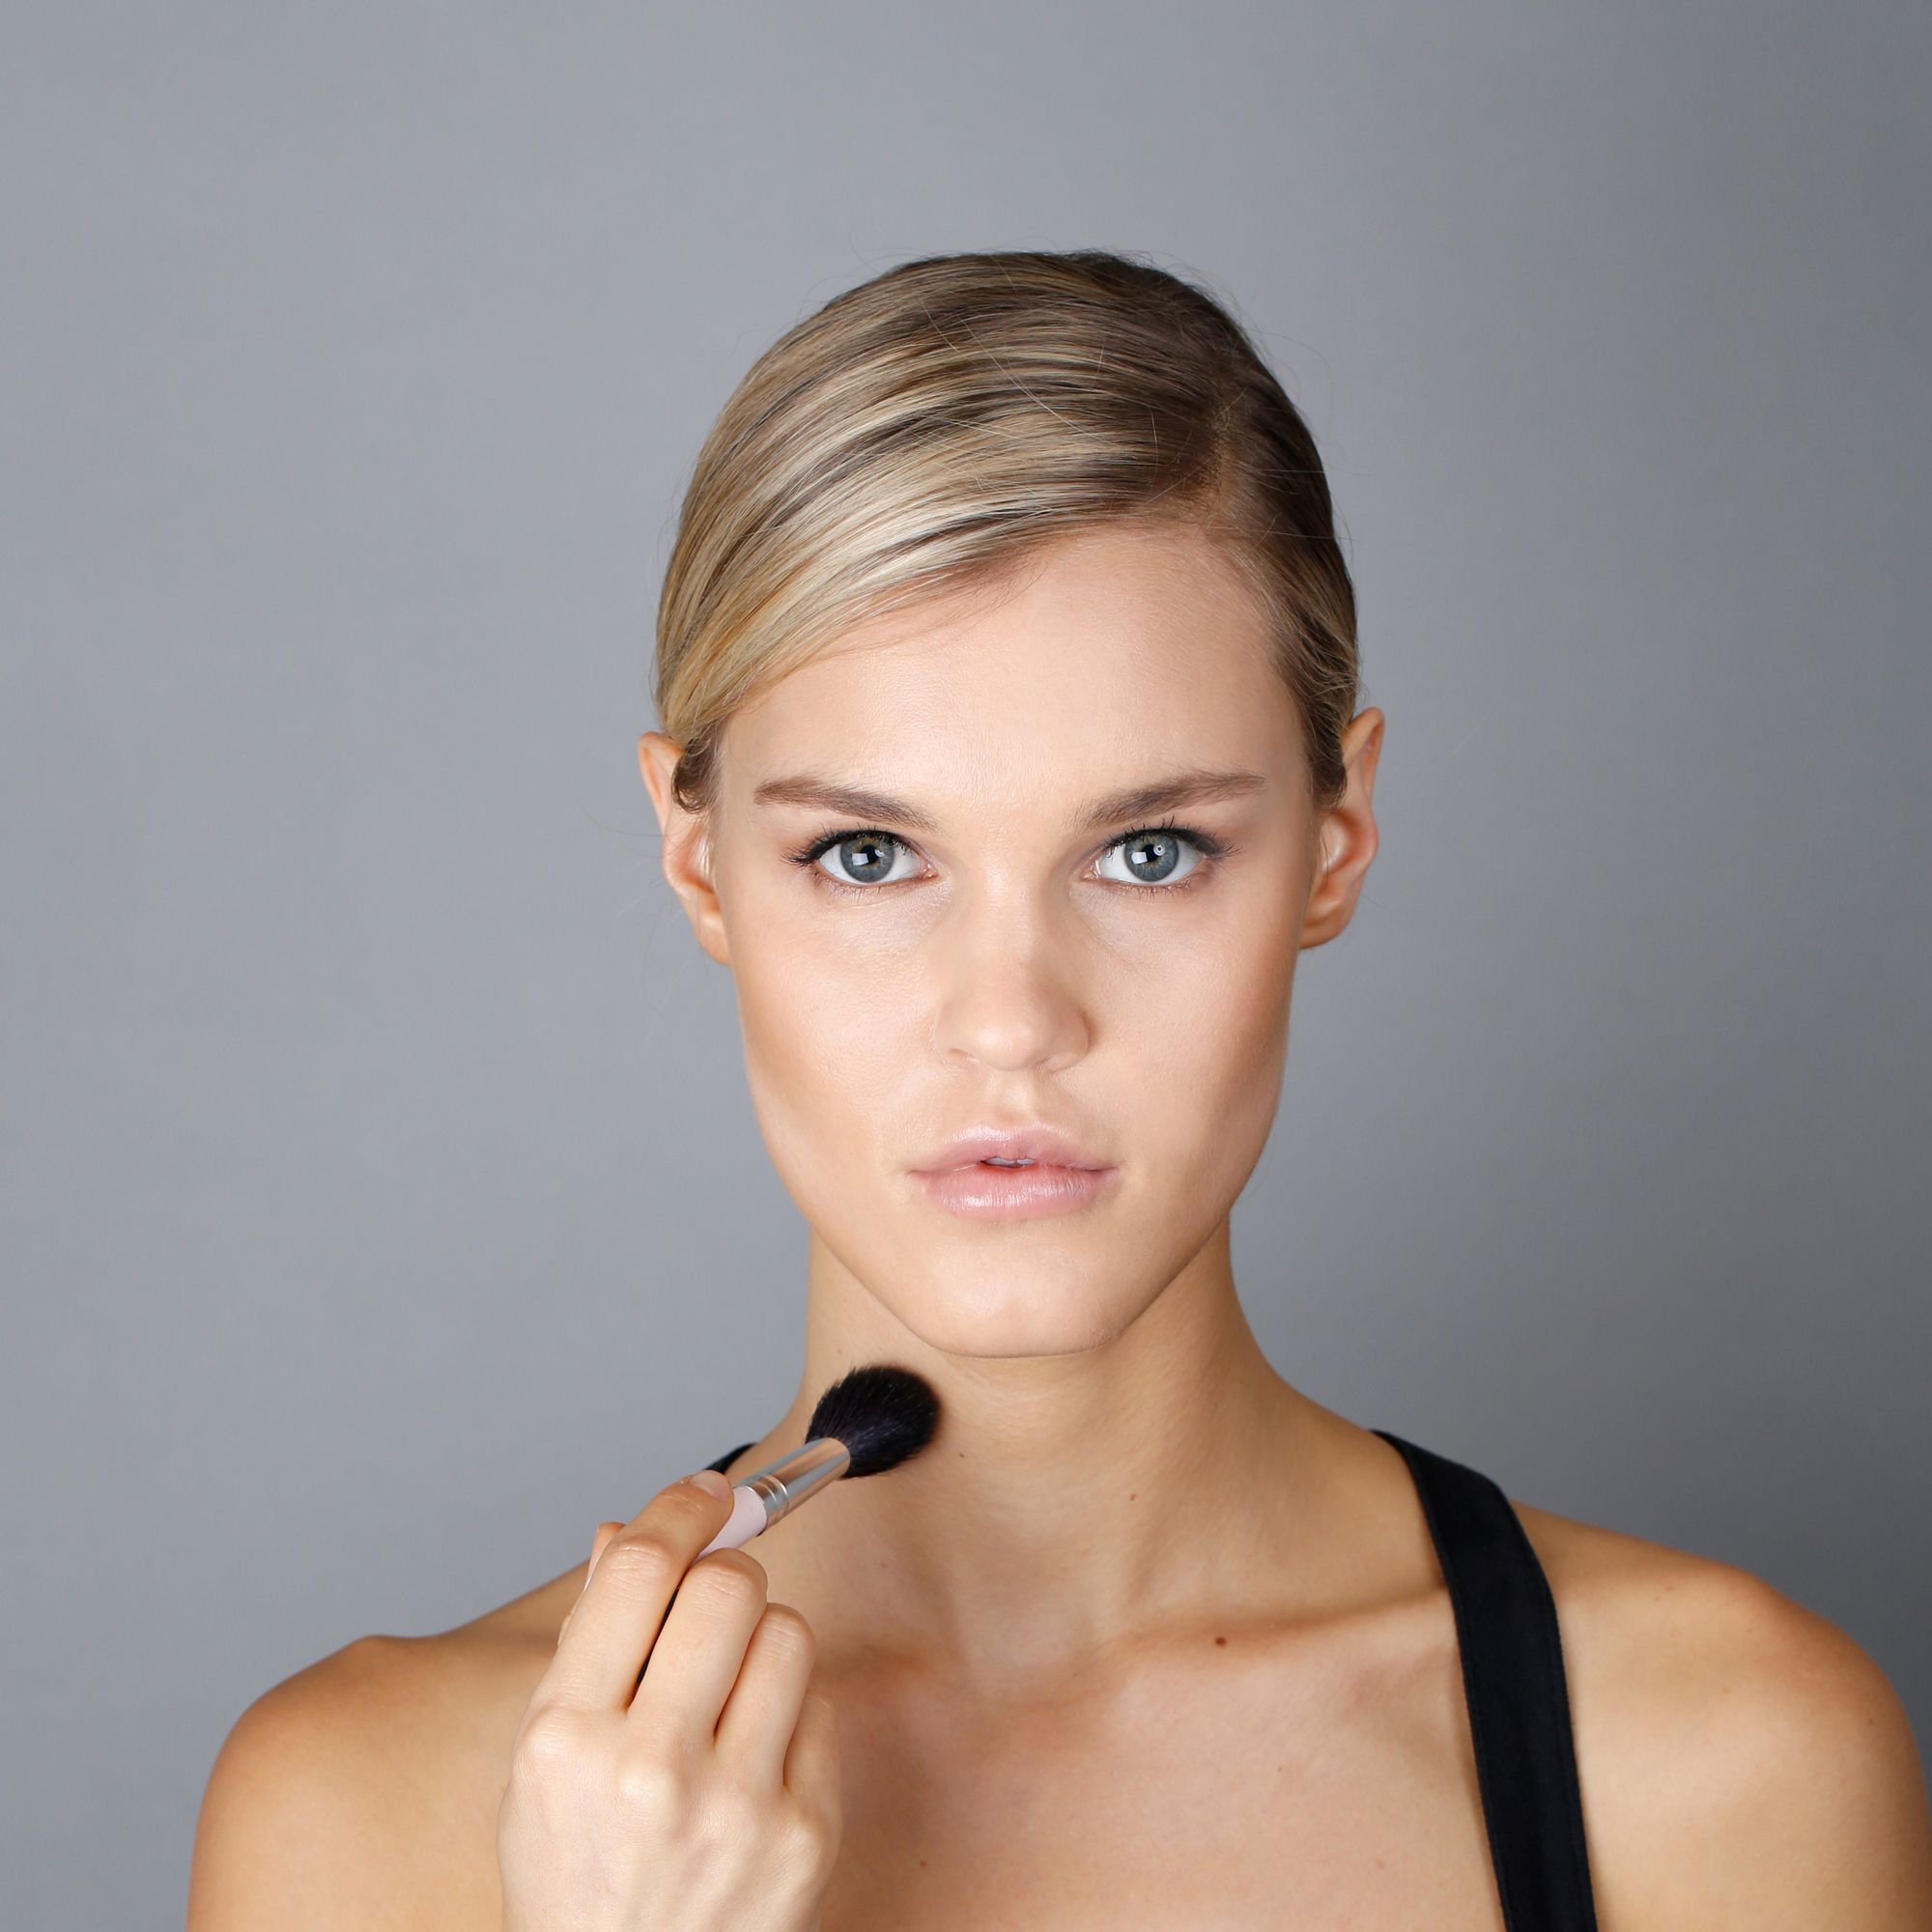 How to Contour Your Face: Step-by-Step Guide